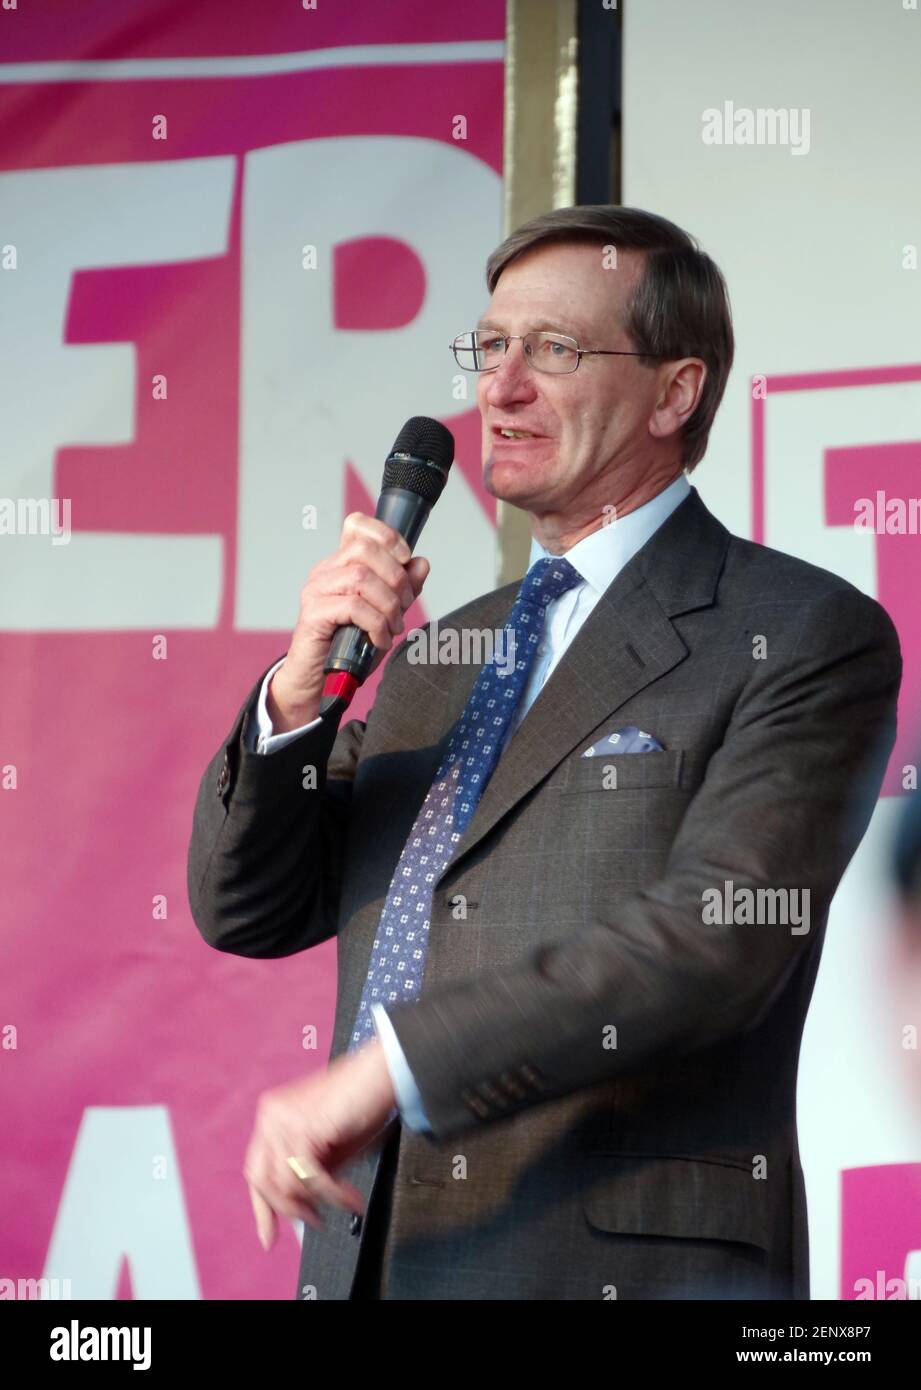 British barrister and former politician Dominic Grieve speaking at the third People's Vote March, Parliament Square, London, UK on 19 October 2019. Stock Photo